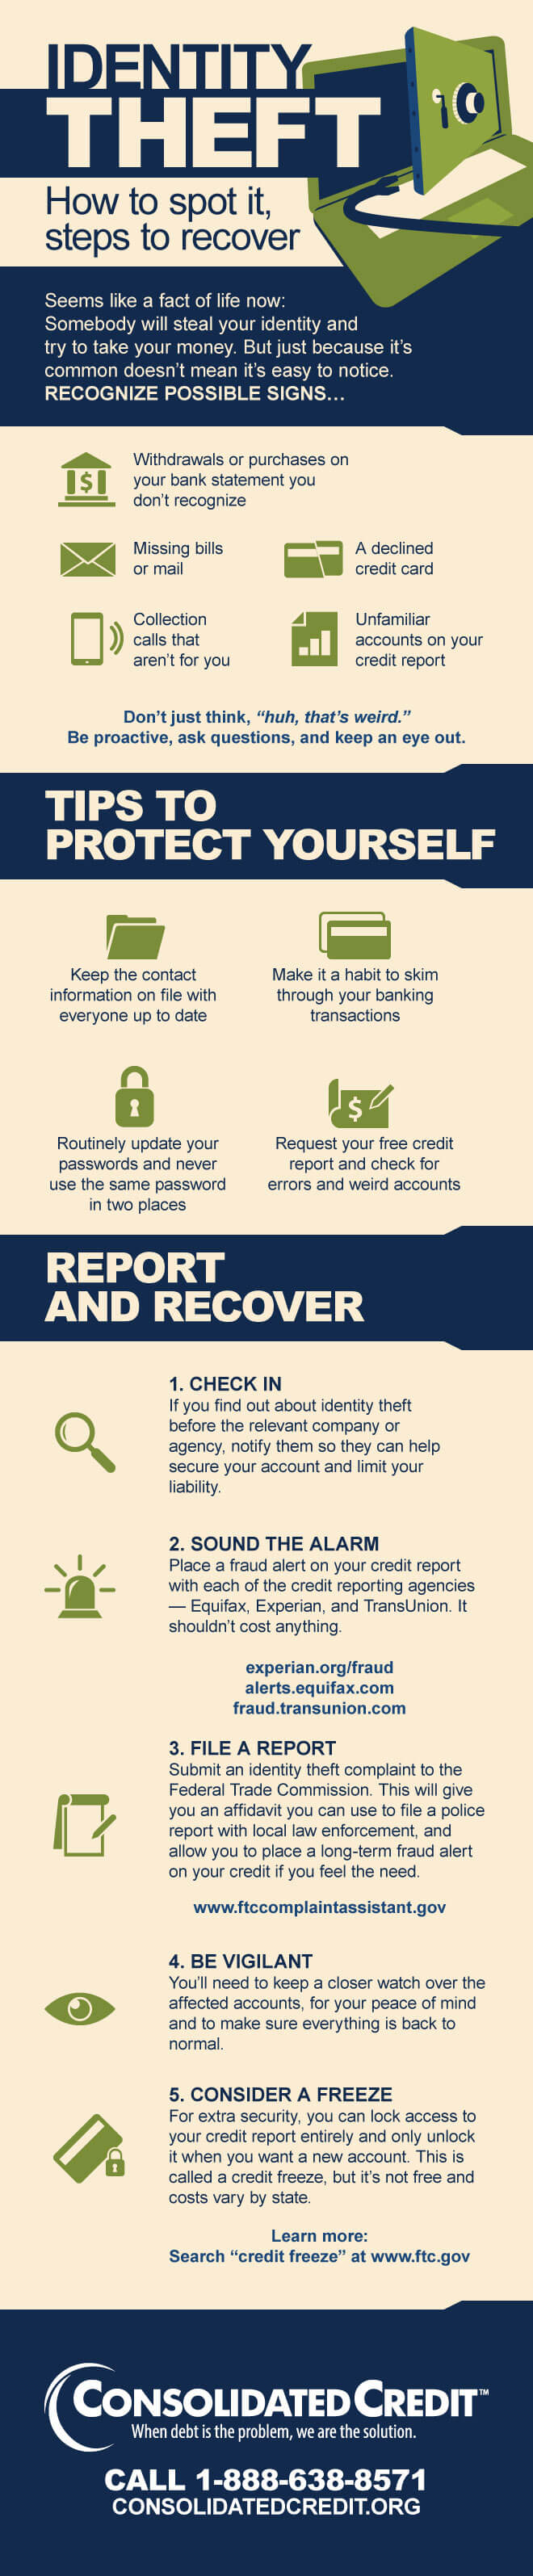 Use Consolidated Credit's identity theft protection infographic to guard against ID theft and credit fraud